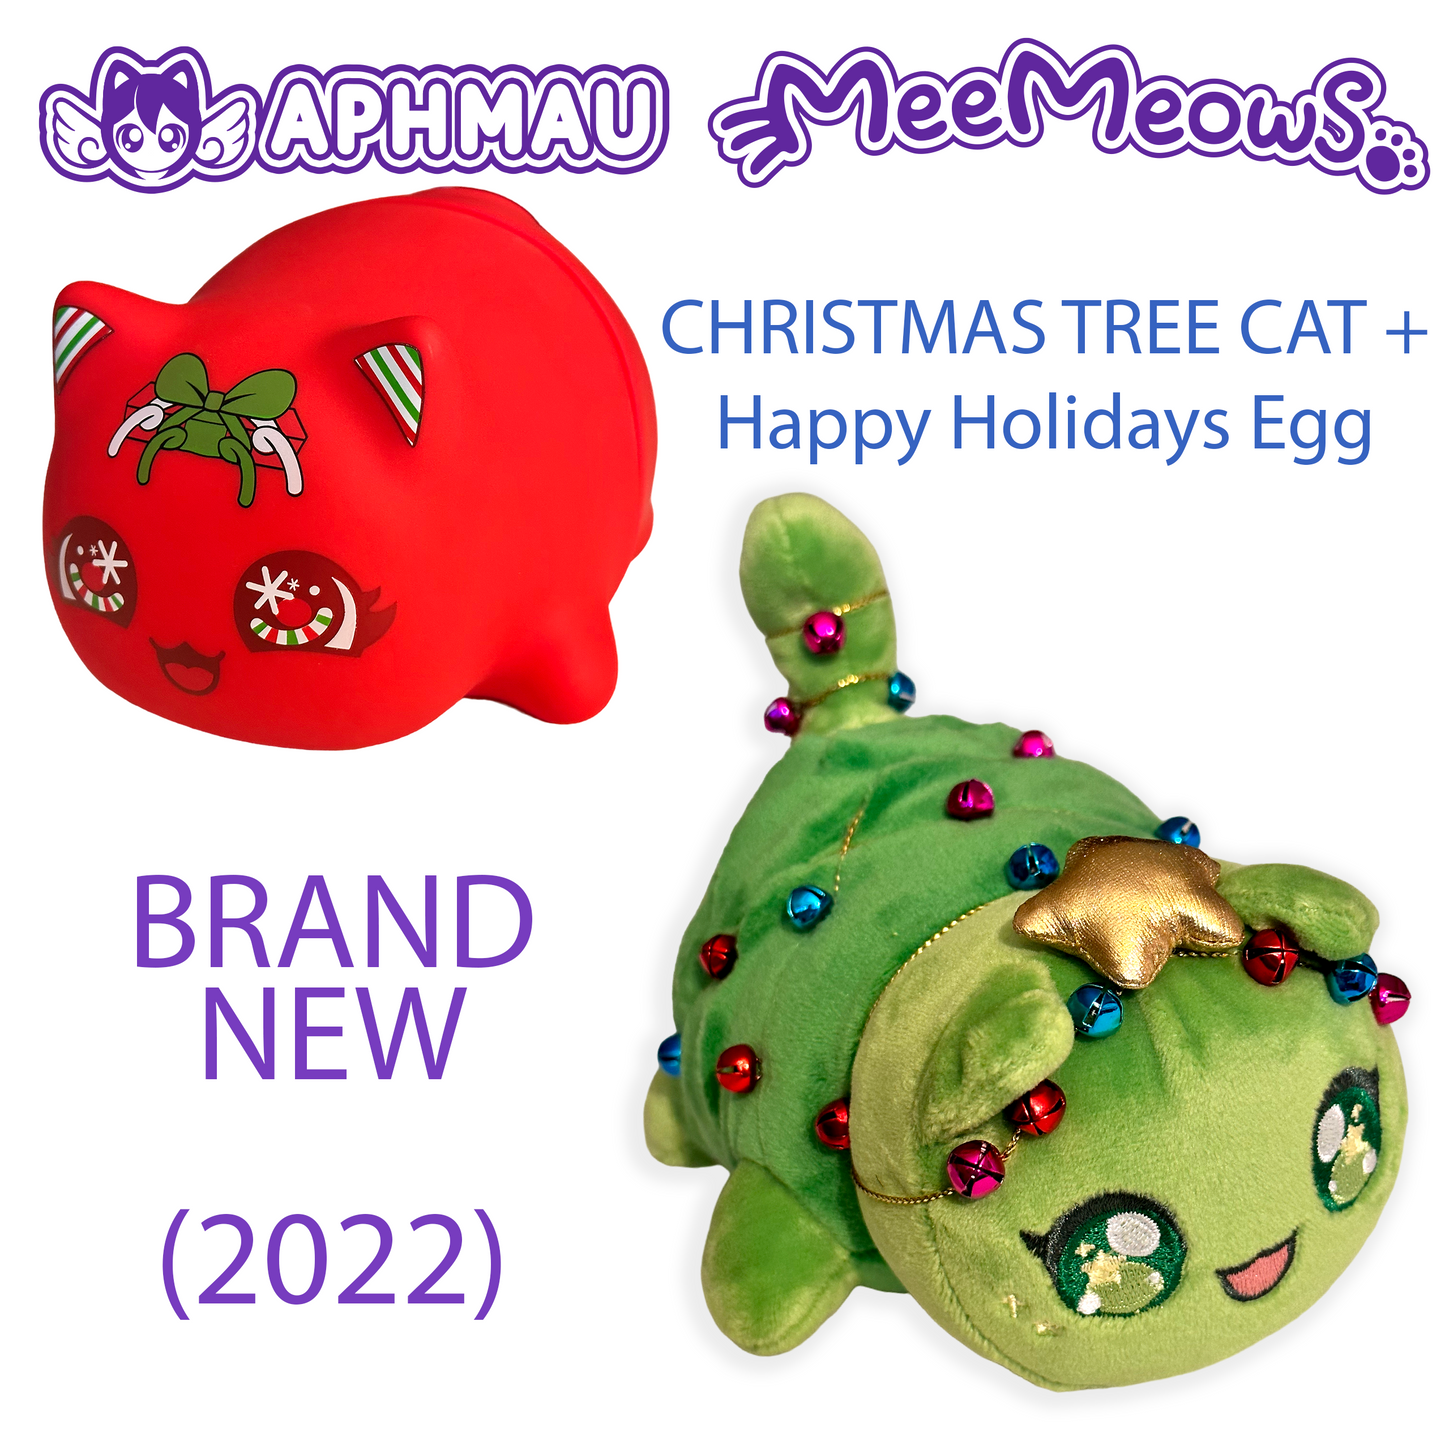 CHRISTMAS TREE CAT - HAPPY Holidays Mystery Egg (NEW) Exclusive Kitty Plush!